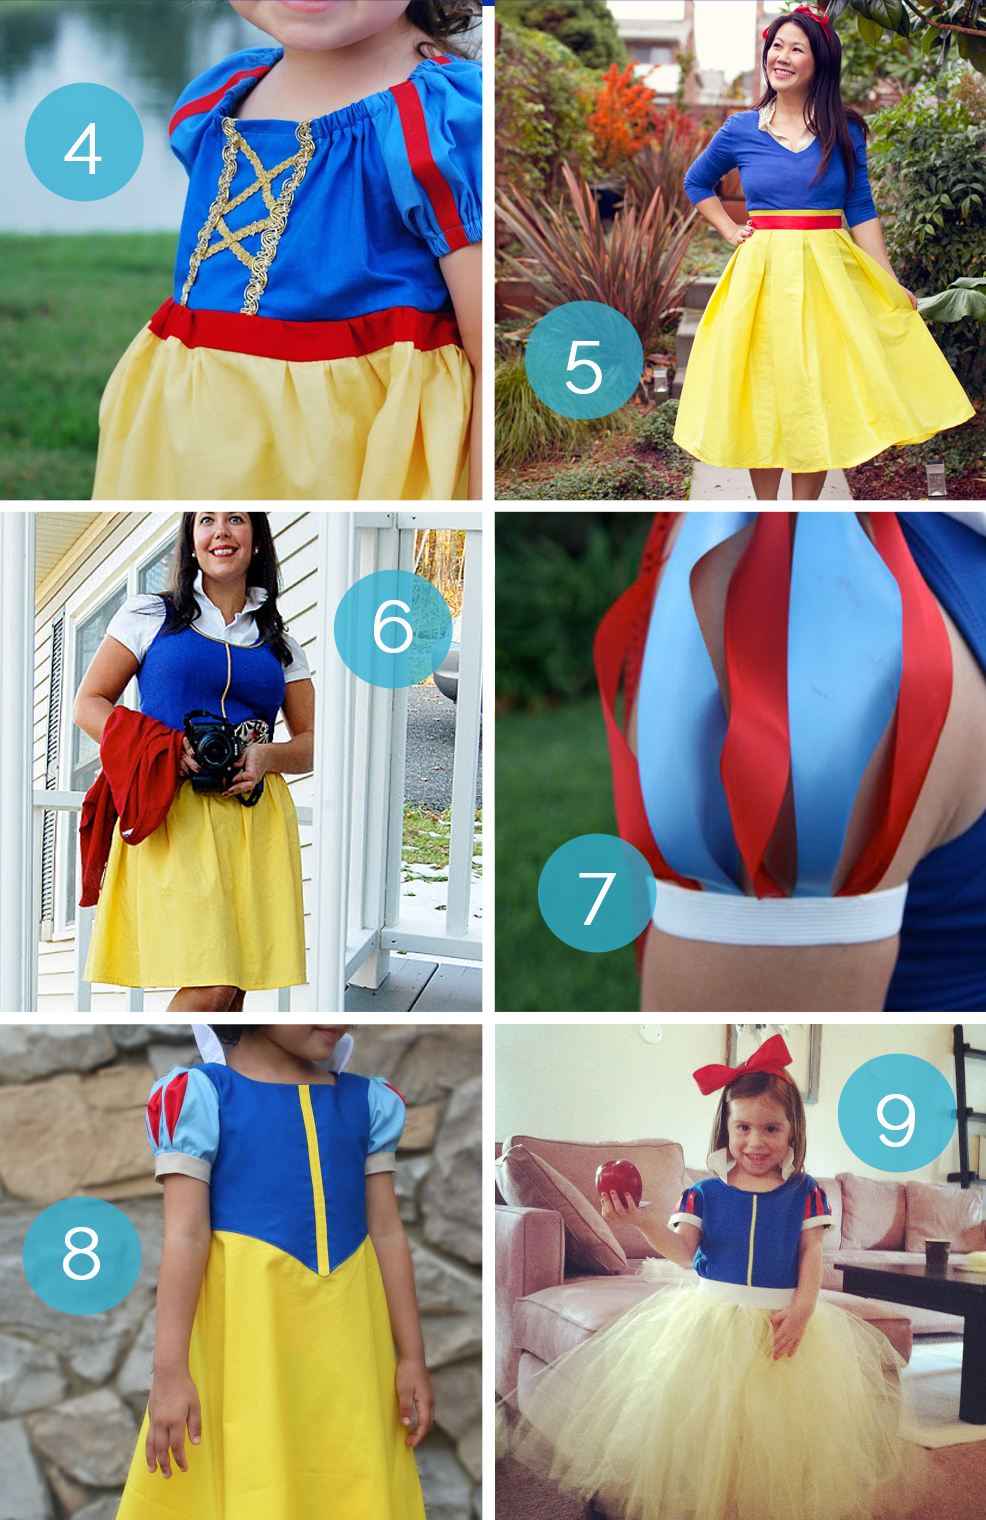 huge list of DIY princess costumes: DIY Snow white costume and more!